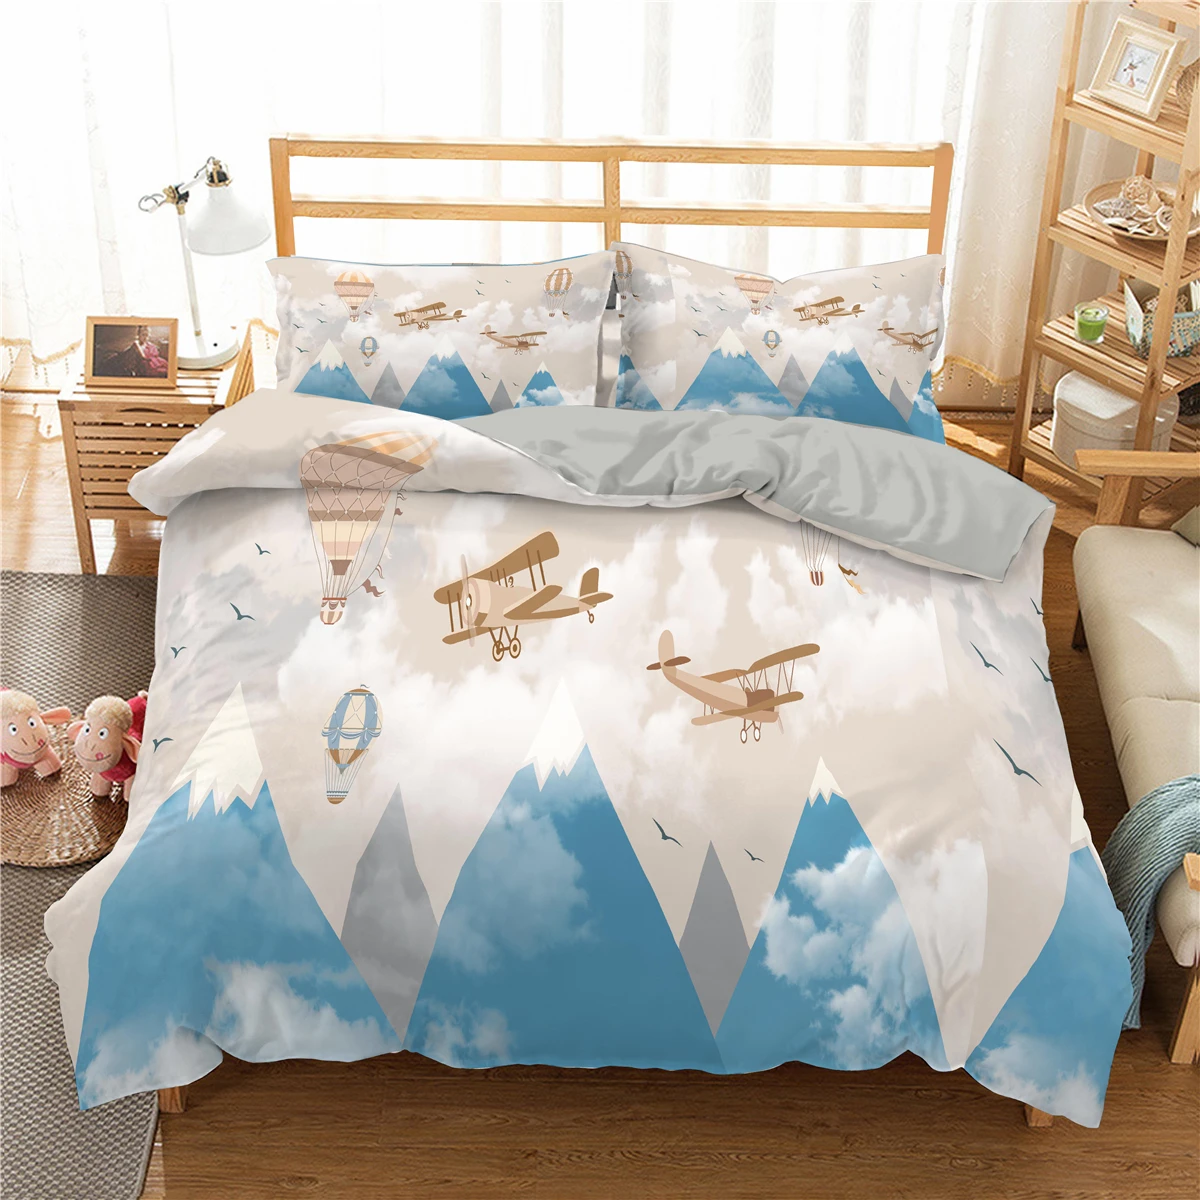 

3d Helicopter priented Bedding Set 2/3pcs Luxury Queen King Twin Size Duvet Cover 220x240 Quilt Cover Home Textiles Bedclothes